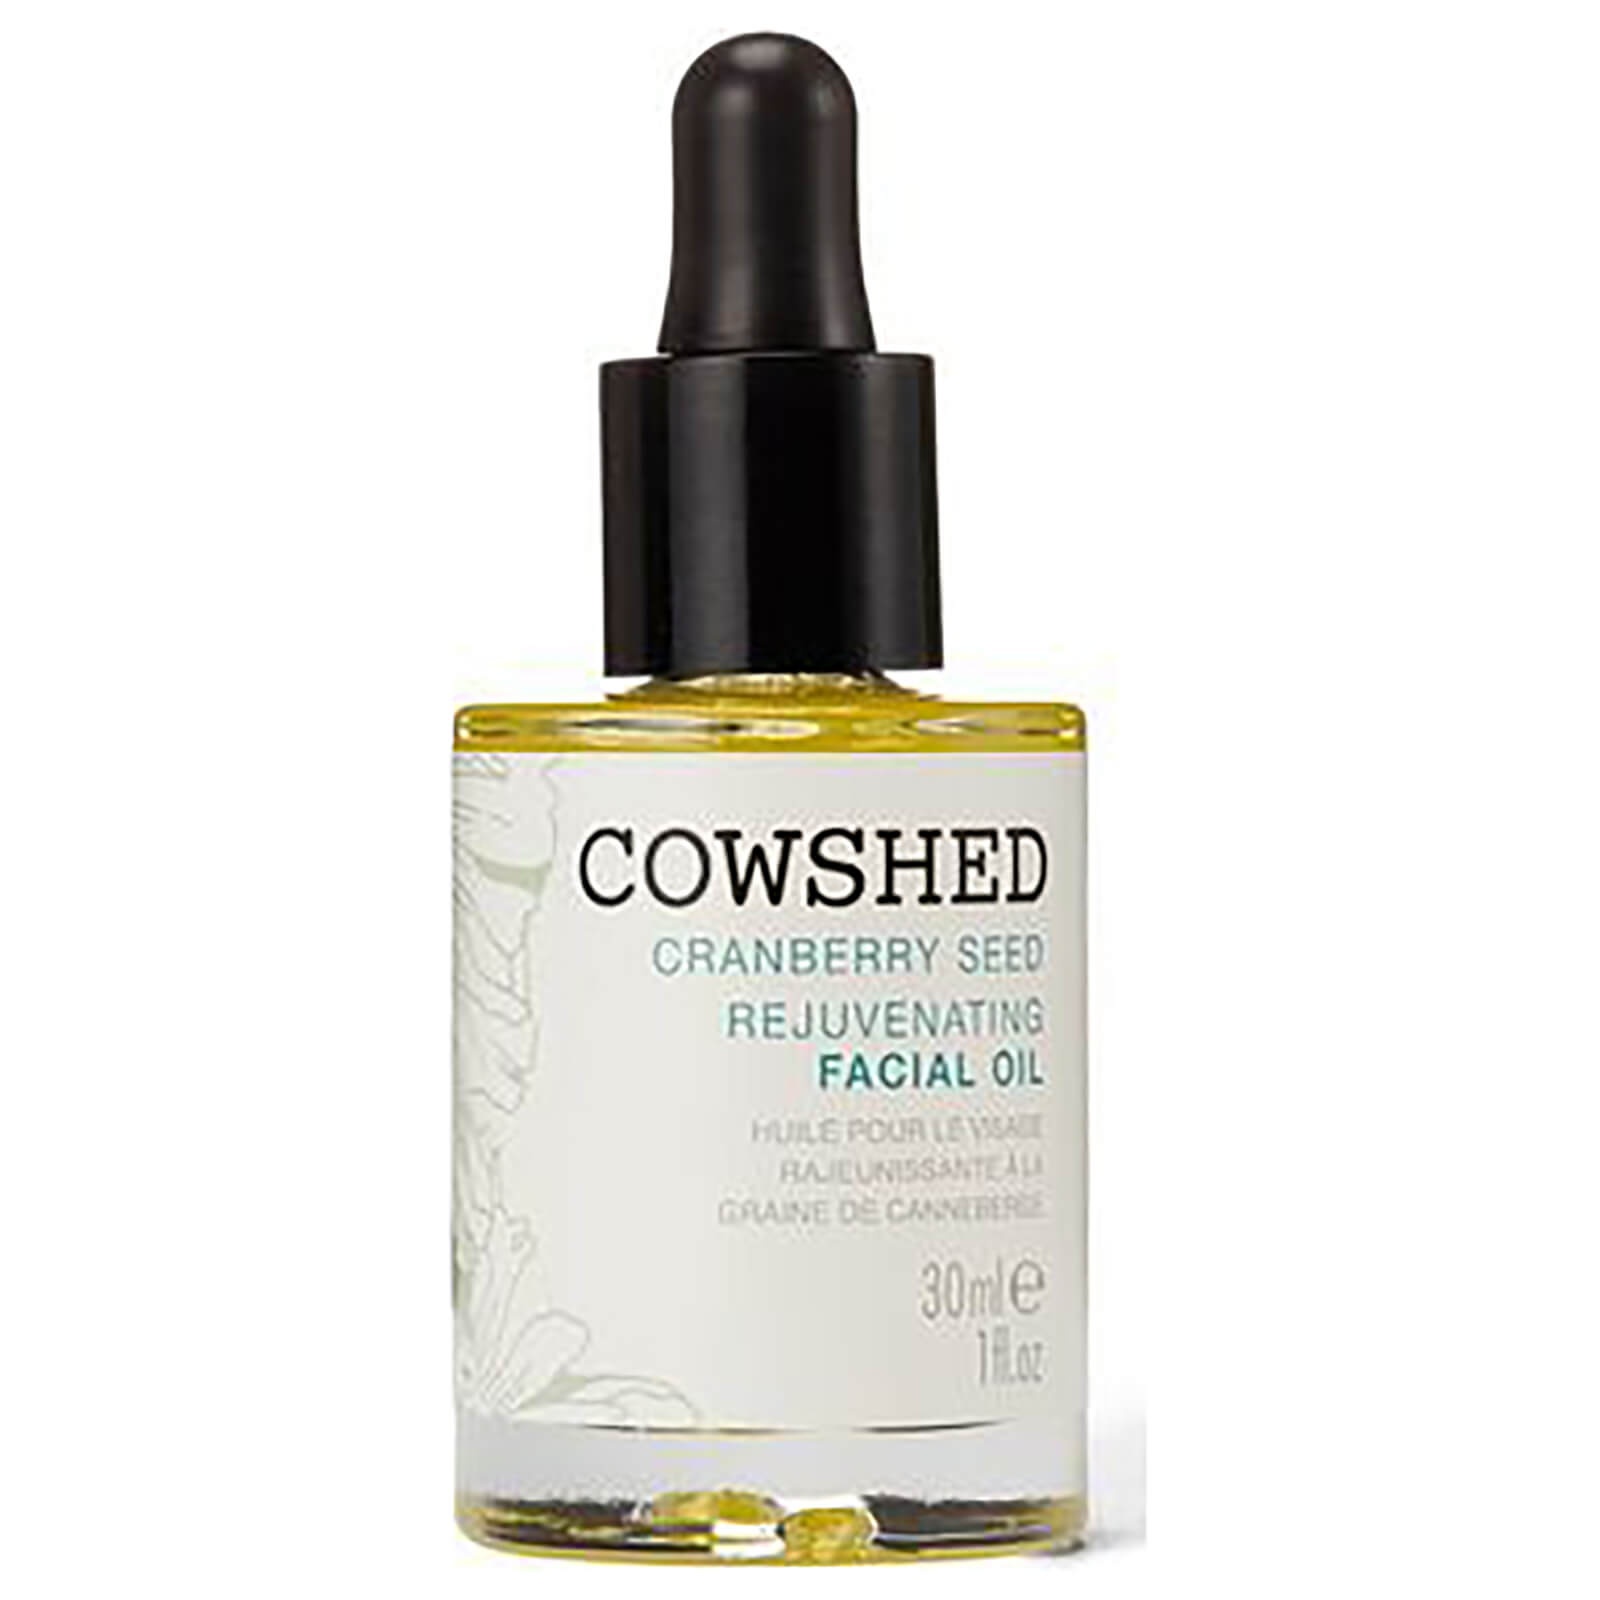 Cowshed Cranberry Seed Rejuvenating Facial Oil 30ml